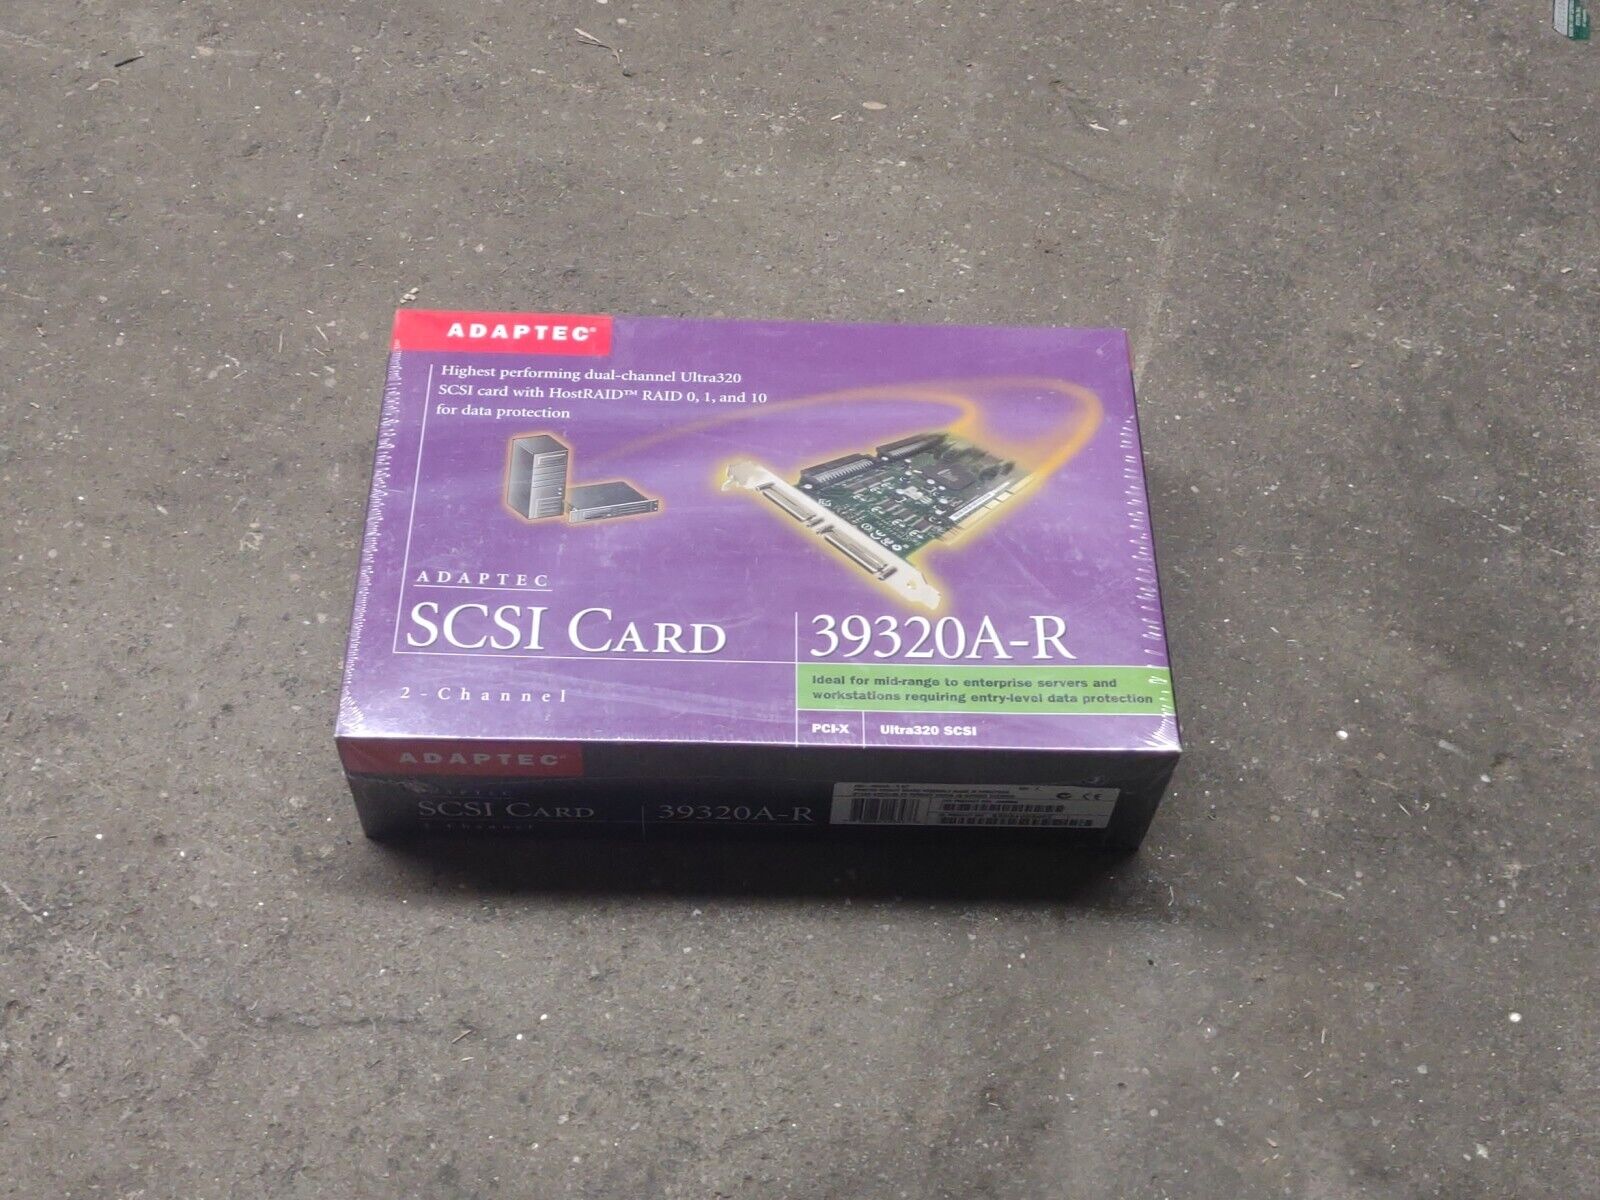 ADAPTEC SCSI CARD, 2 Channel, PCI-X, Ultra320 SCSI, 39320A-R, New Sealed